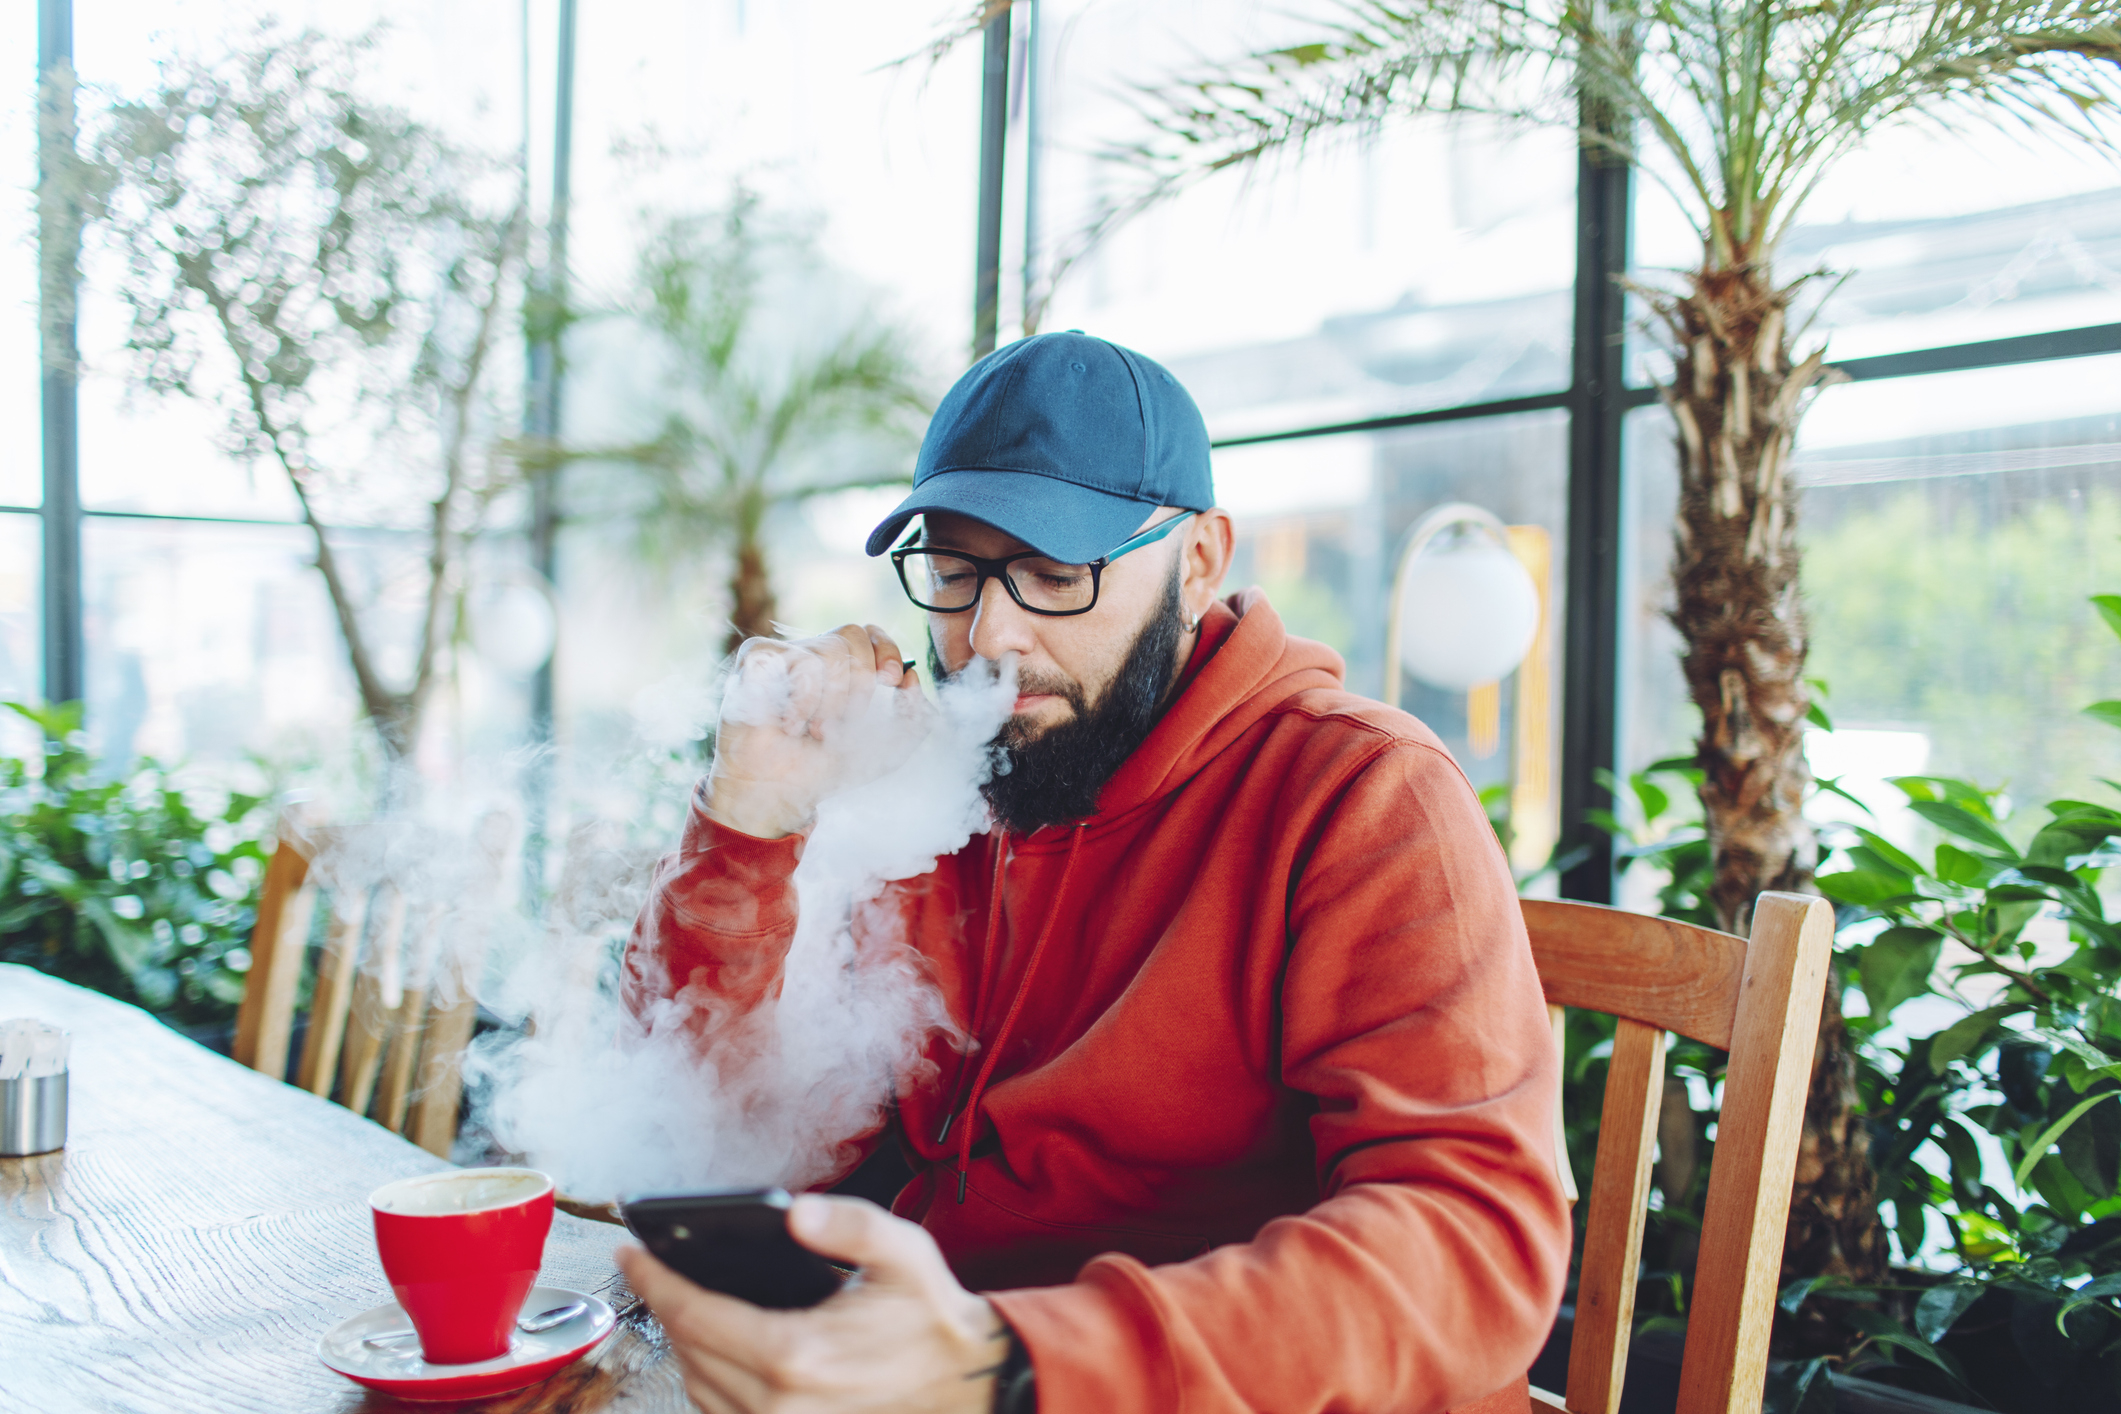 Man in a cap using a phone while exhaling vapor from an e-cigarette at a cafe table